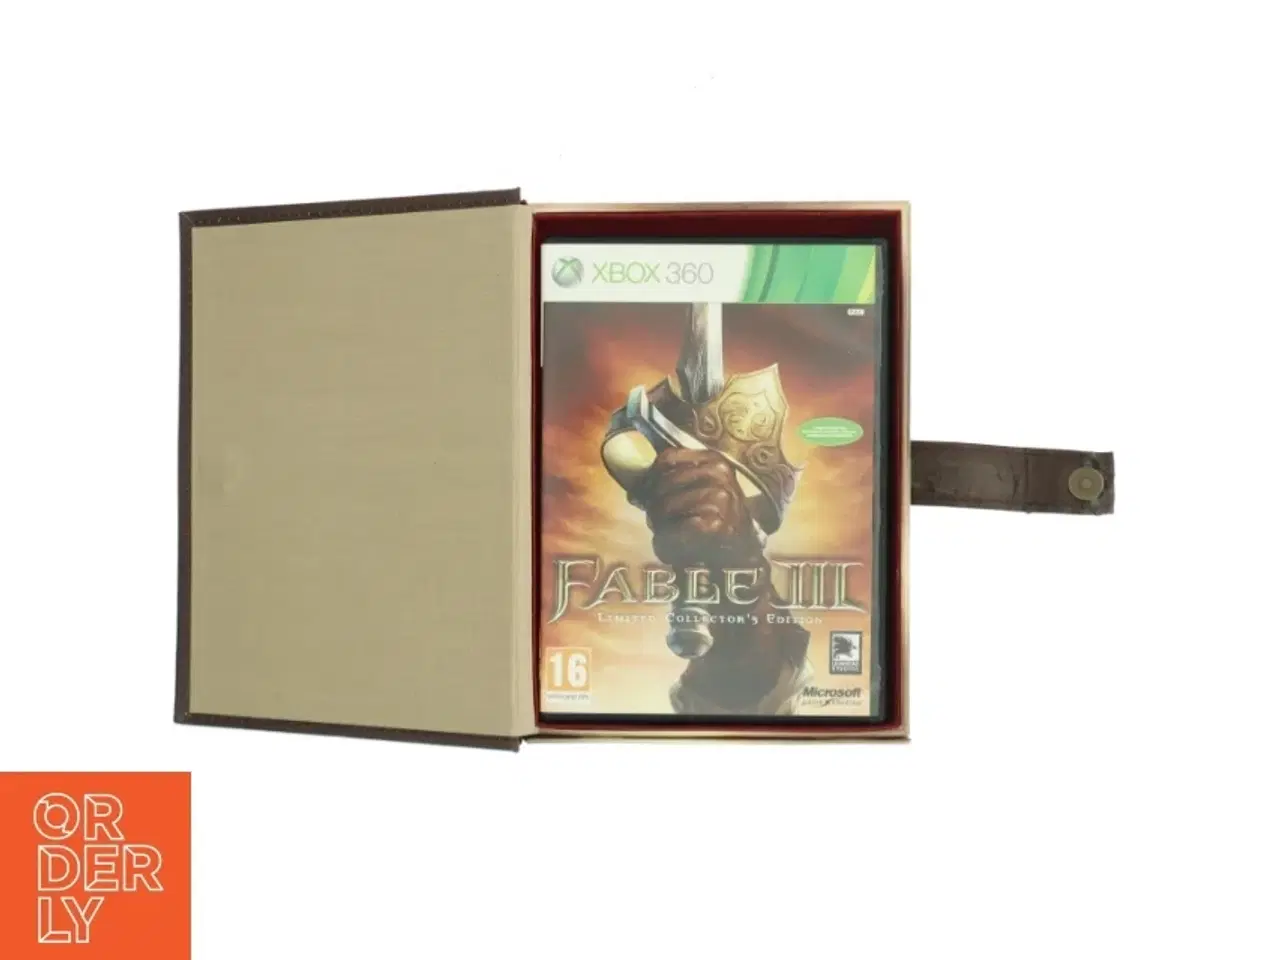 Billede 2 - Fable III Limited Collector's Edition Spil fra Microsoft